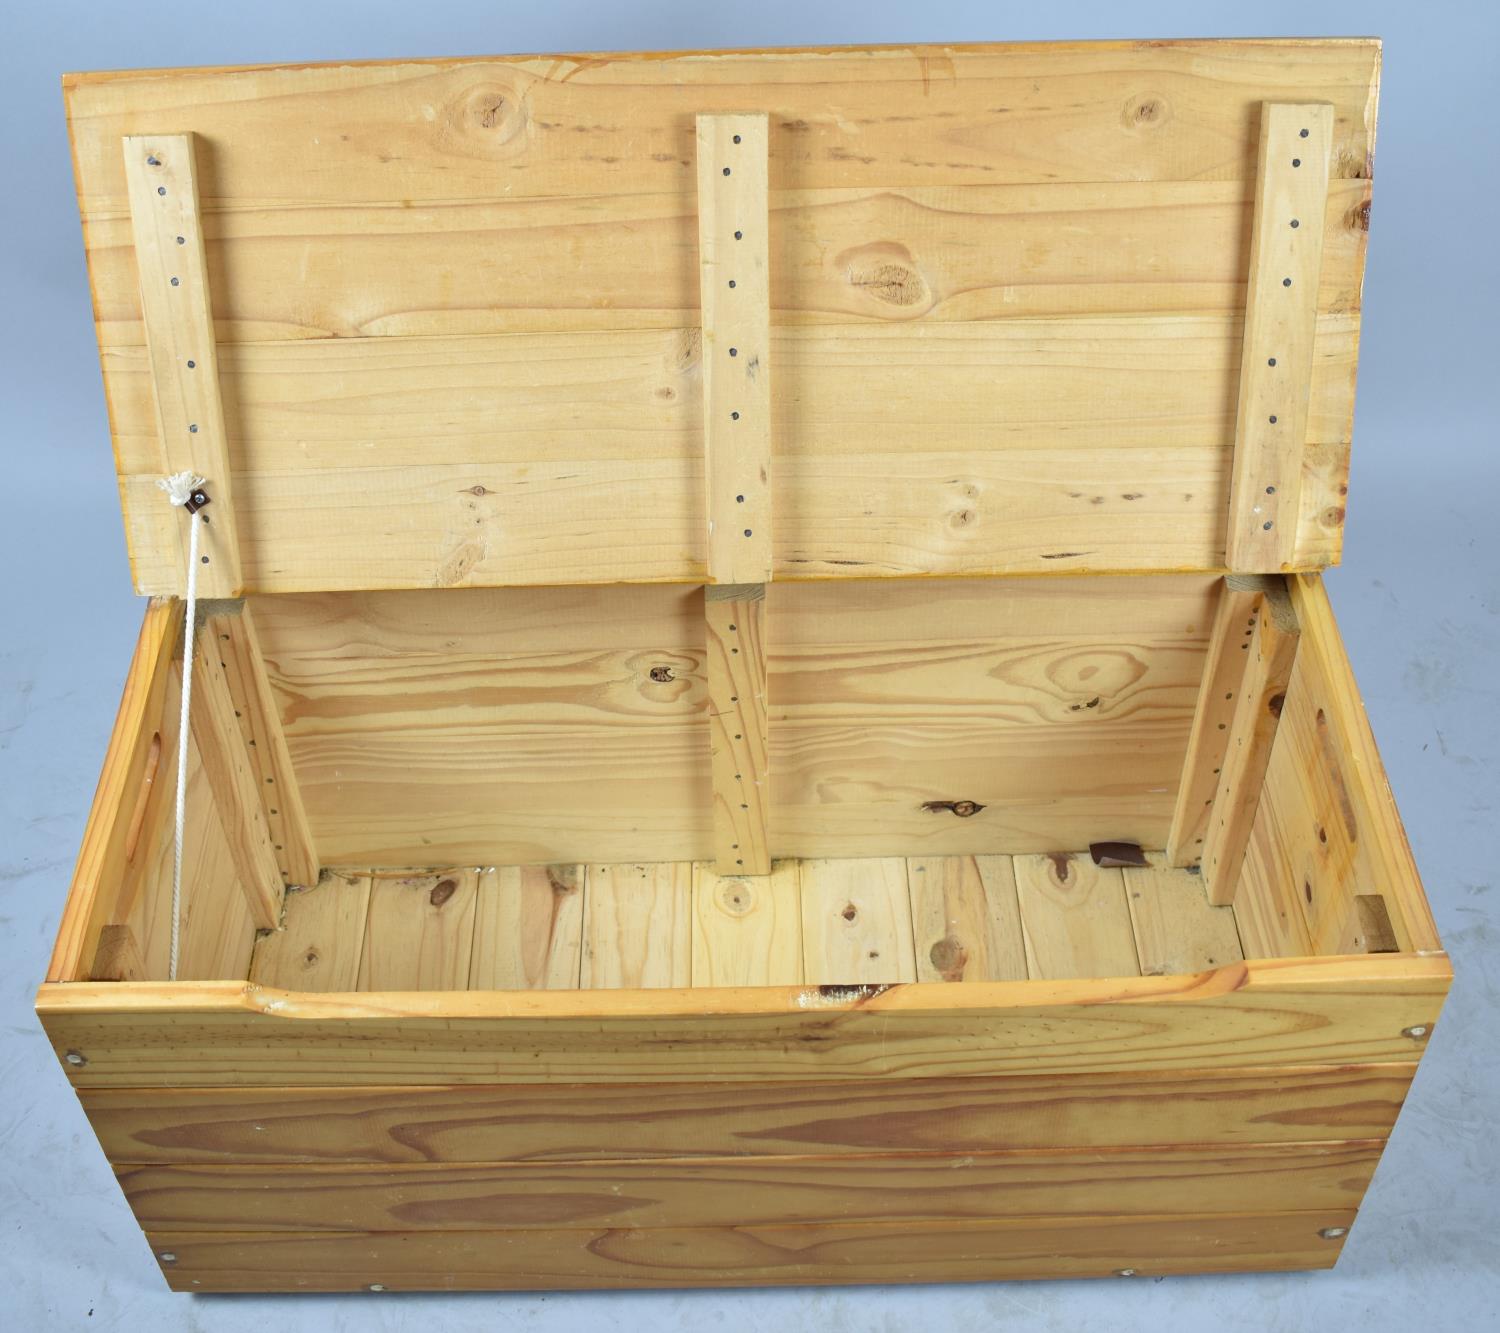 A Modern Pine Storage or Toy Box, 80cm Long - Image 2 of 2